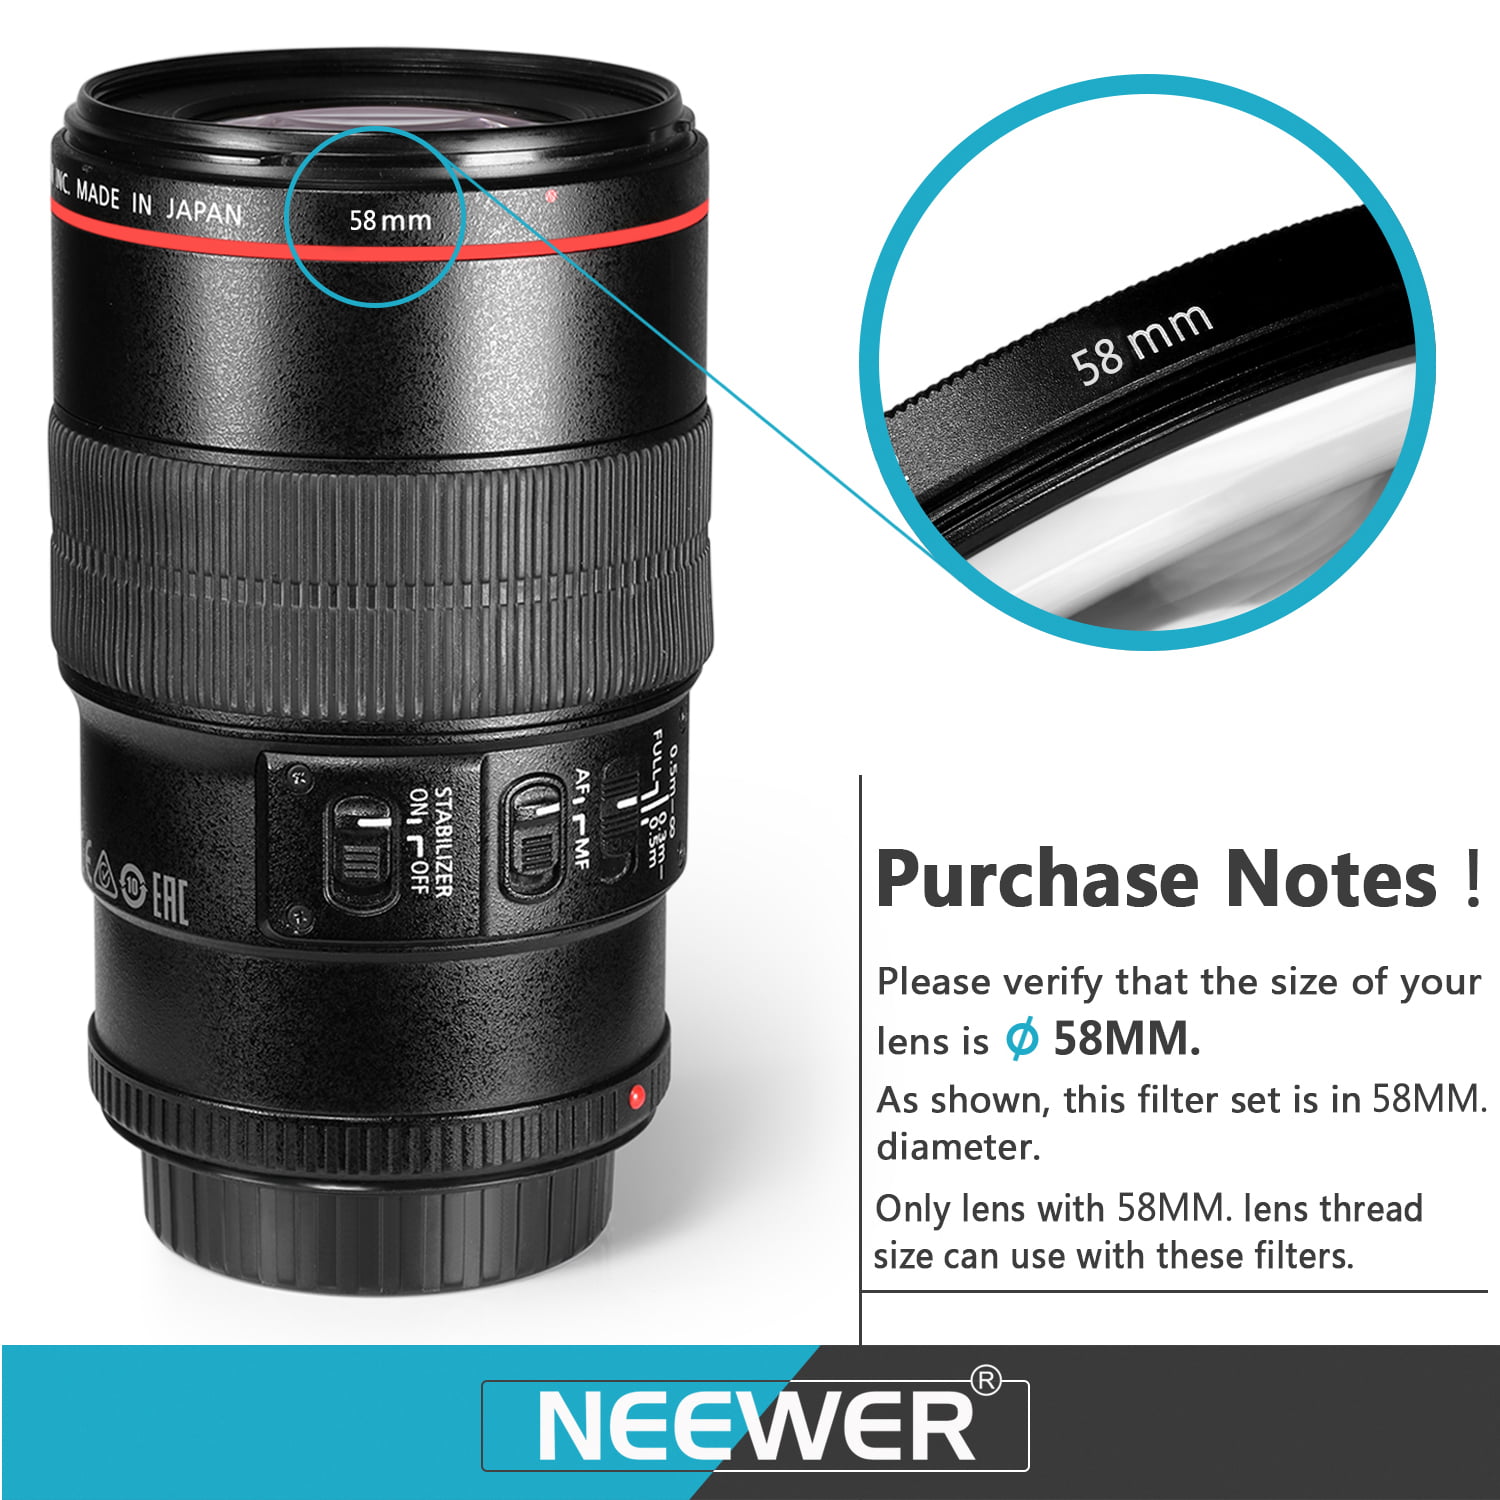 NEEWER NW-58MM COMPLETE LENS FILTER ACCESSORY KIT 